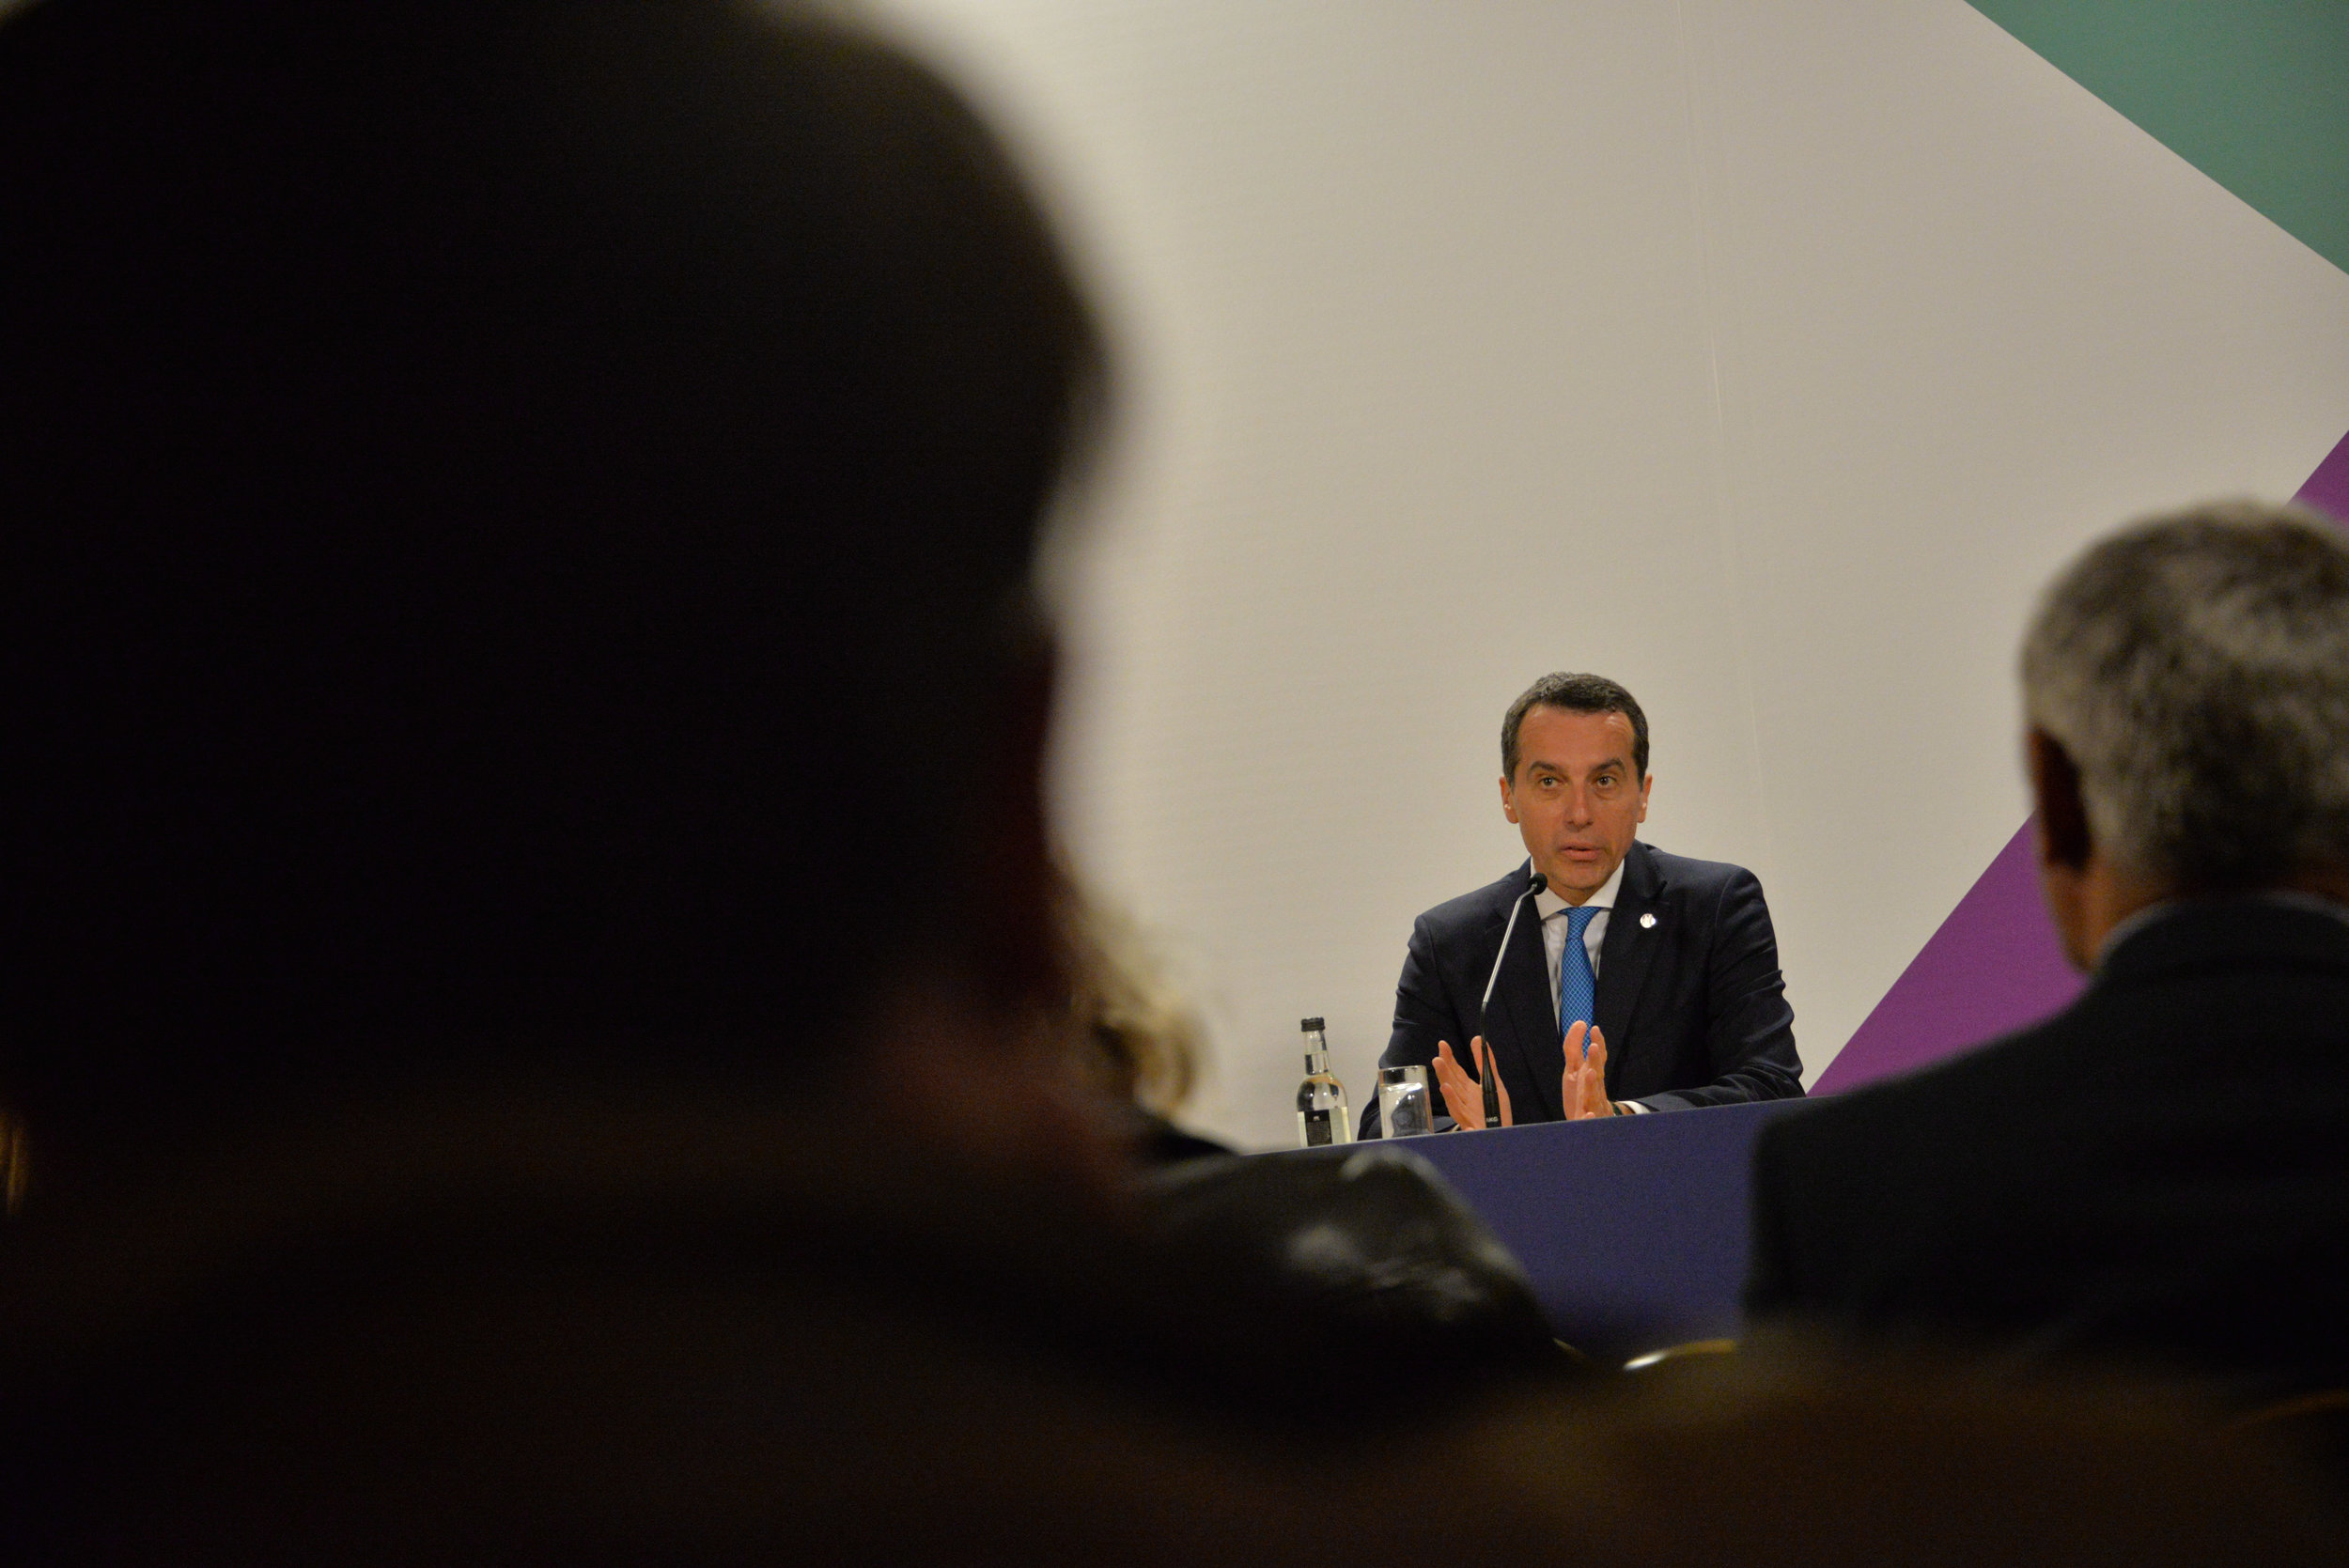  Austrian Chancellor Christian Kern speaks during a press conference at a summit of the European Council in Valletta, Malta, Friday, Feb. 3, 2017. A continued flow of migrants from the Middle East and Africa is pressuring the European Council to act 